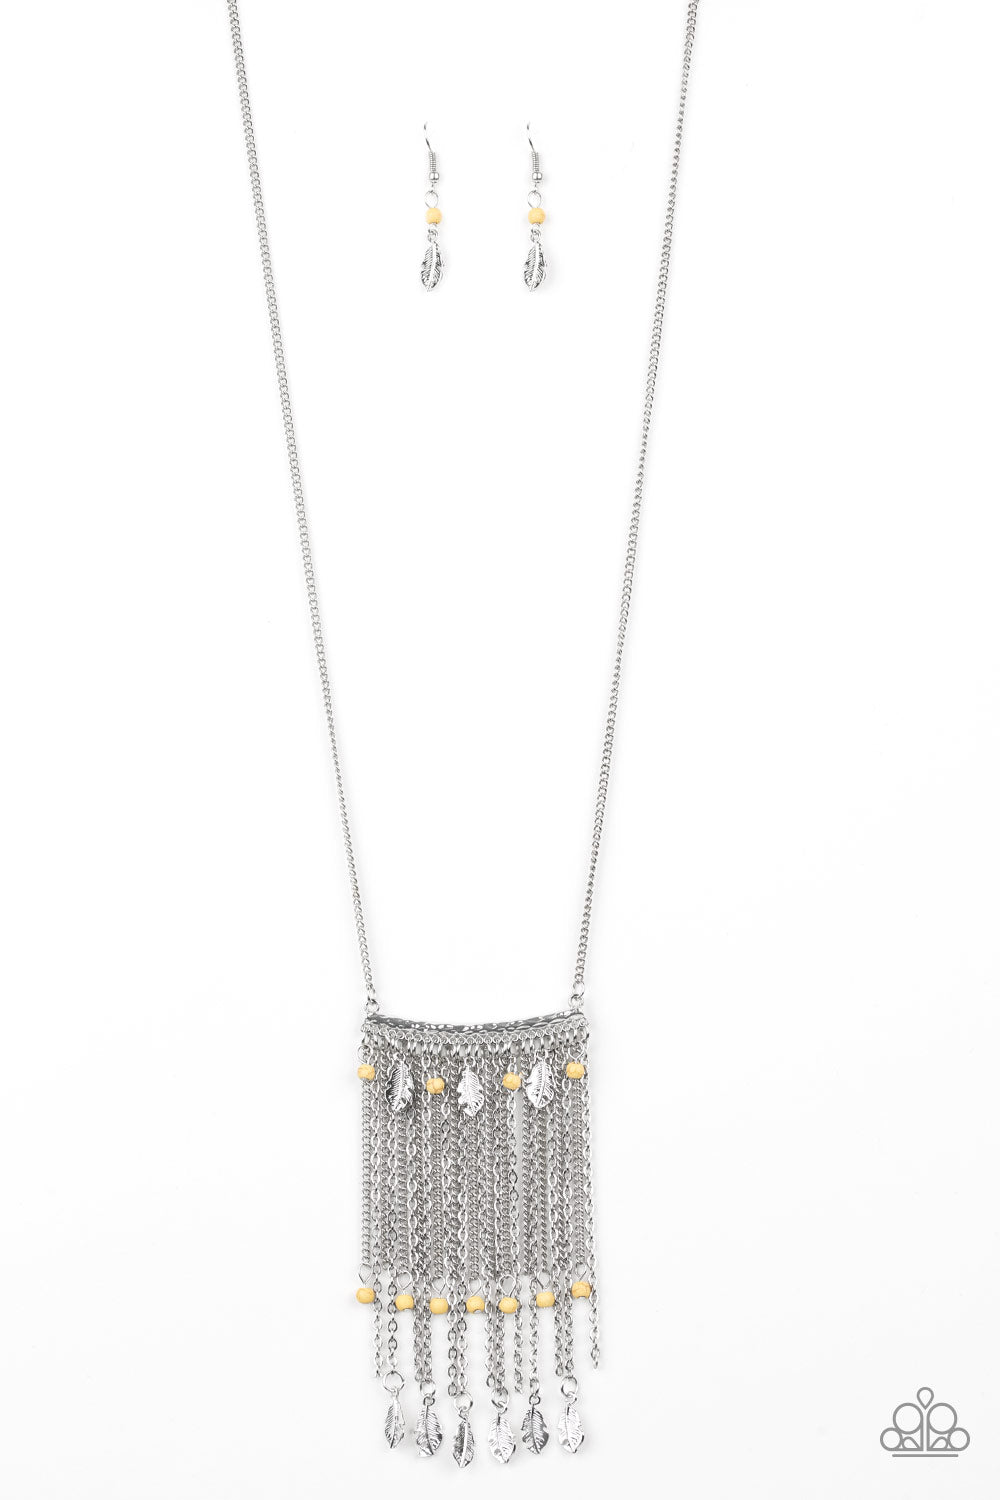 On The Fly - Yellow and Silver Necklace - Paparazzi Accessories - Attached to a lengthened silver chain, a hammered silver bar gives way to a fringe of shimmery silver chain, yellow stone beads, and silver feather frames for a seasonal look. Features an adjustable clasp closure. Sold as one individual necklace.